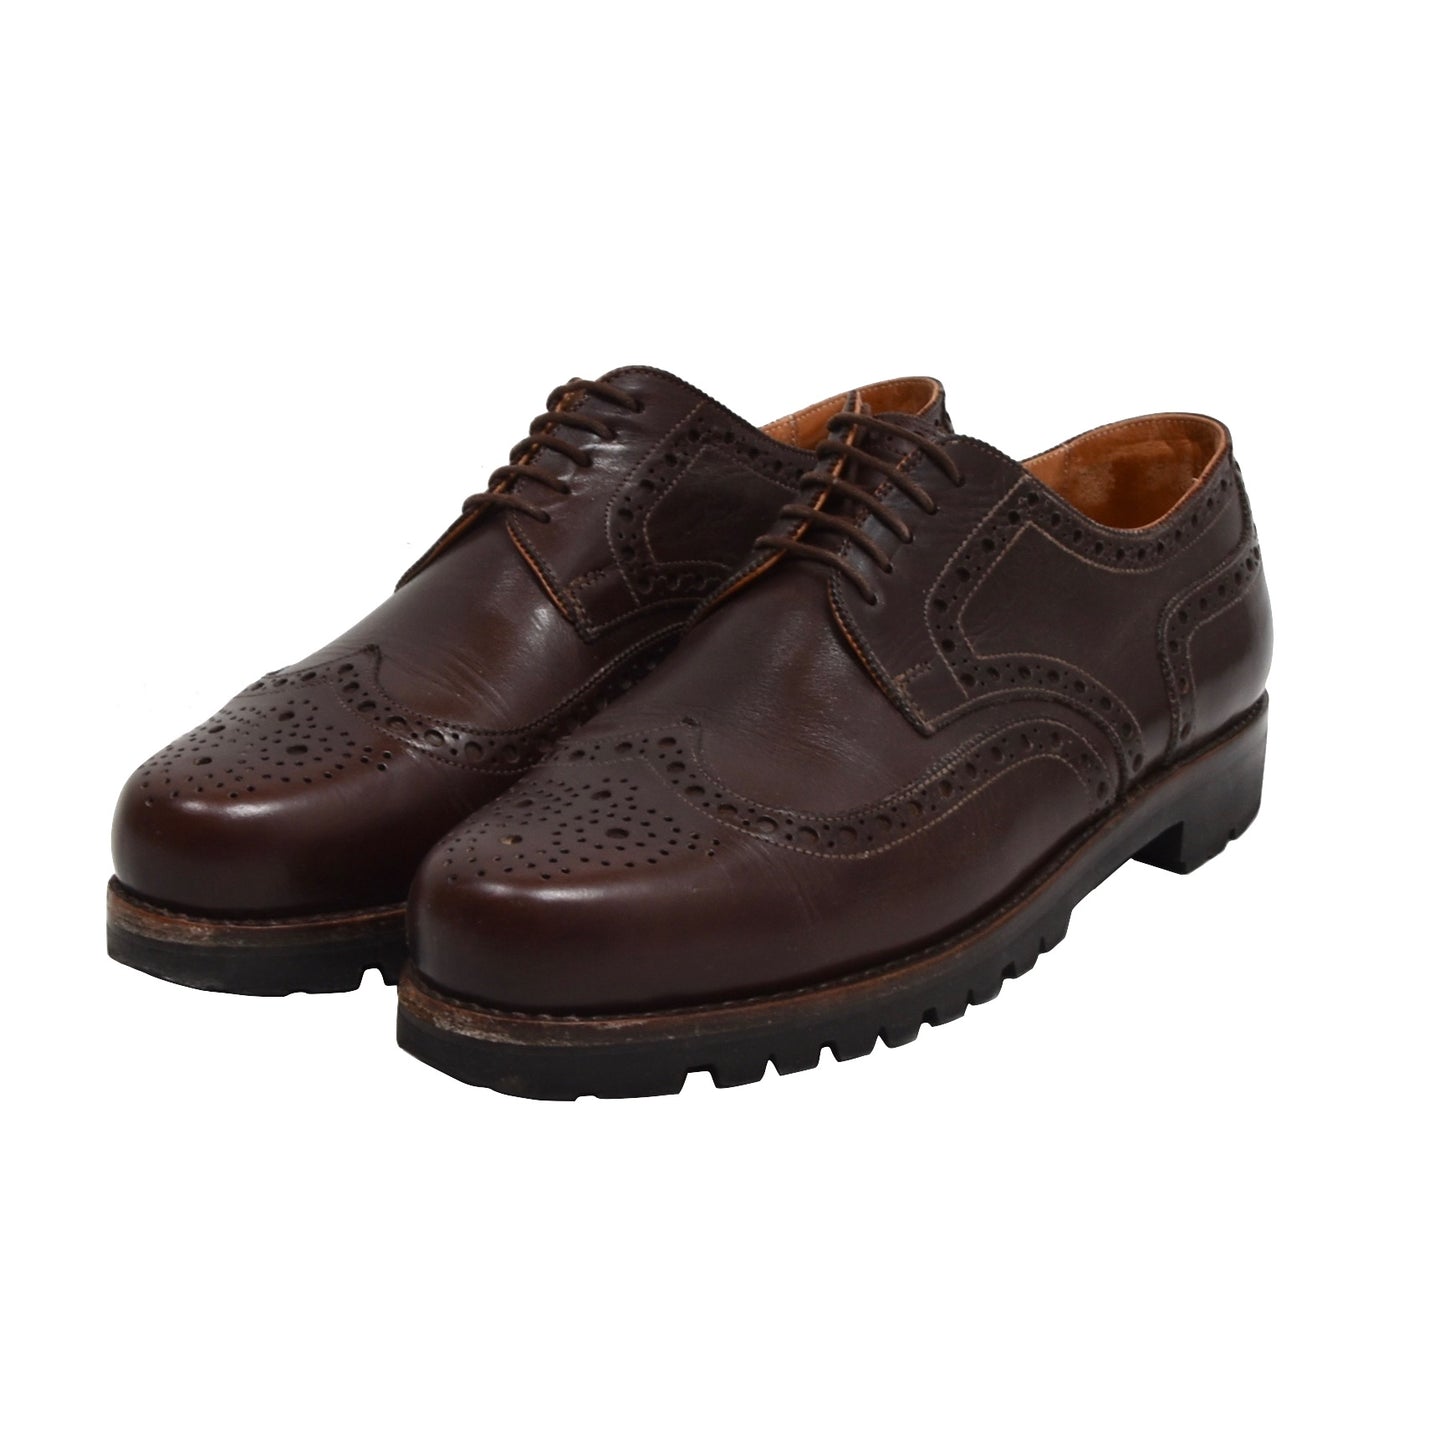 Ludwig Reiter Budapester Shoes Size 8 - Burgundy-Brown